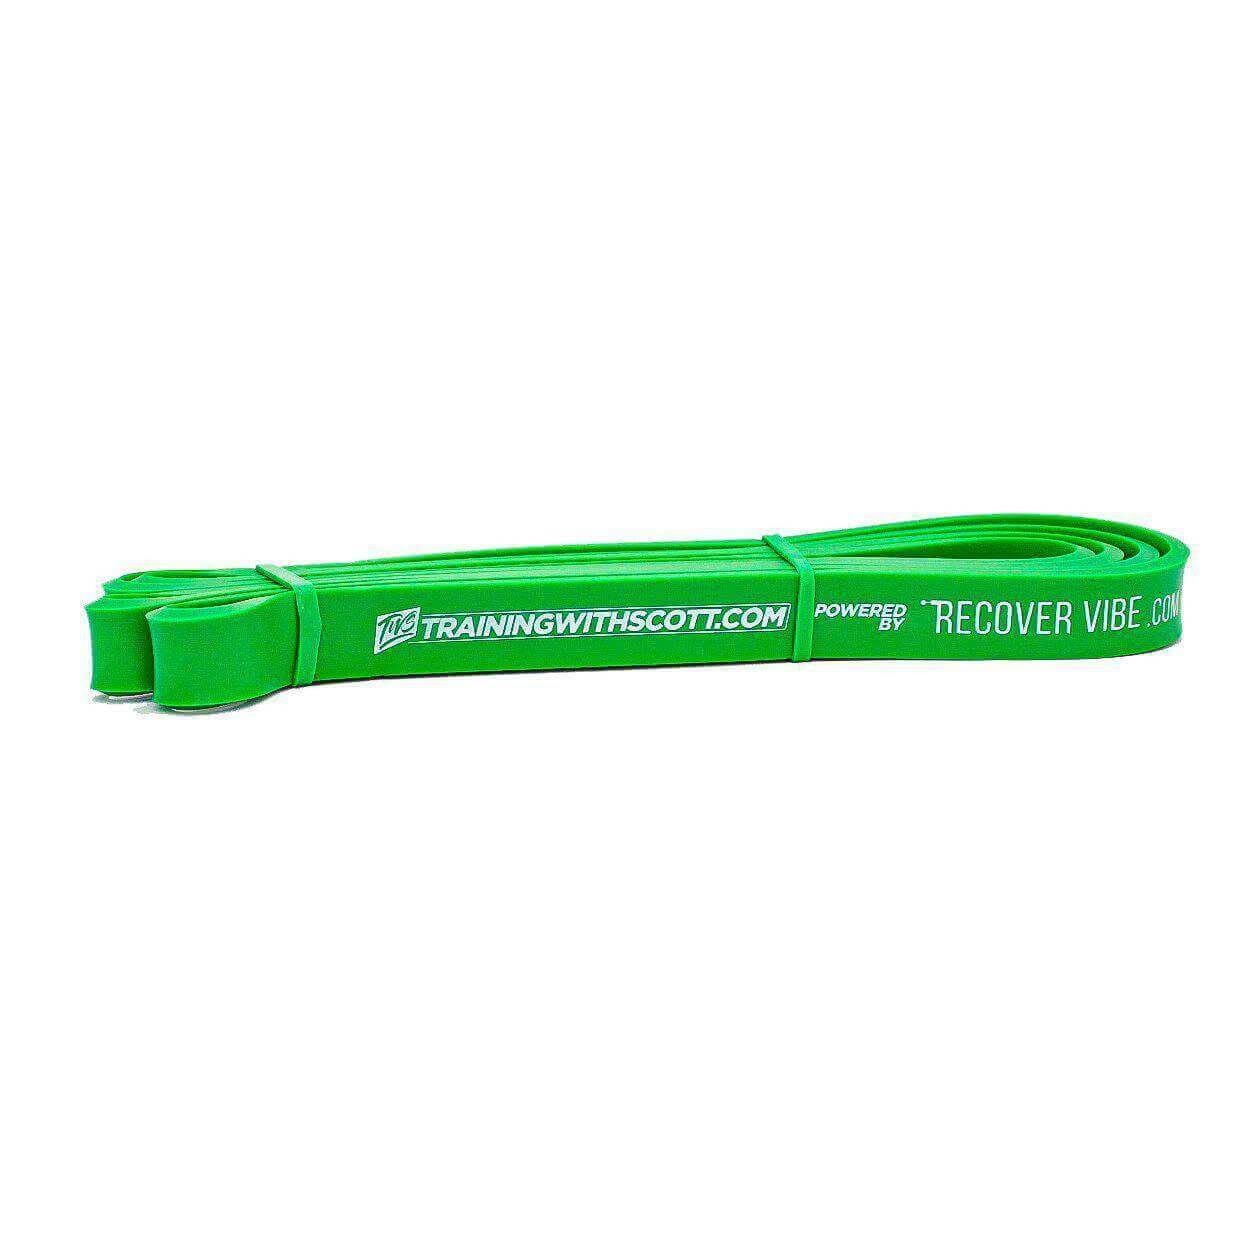 Green TWS resistance bands